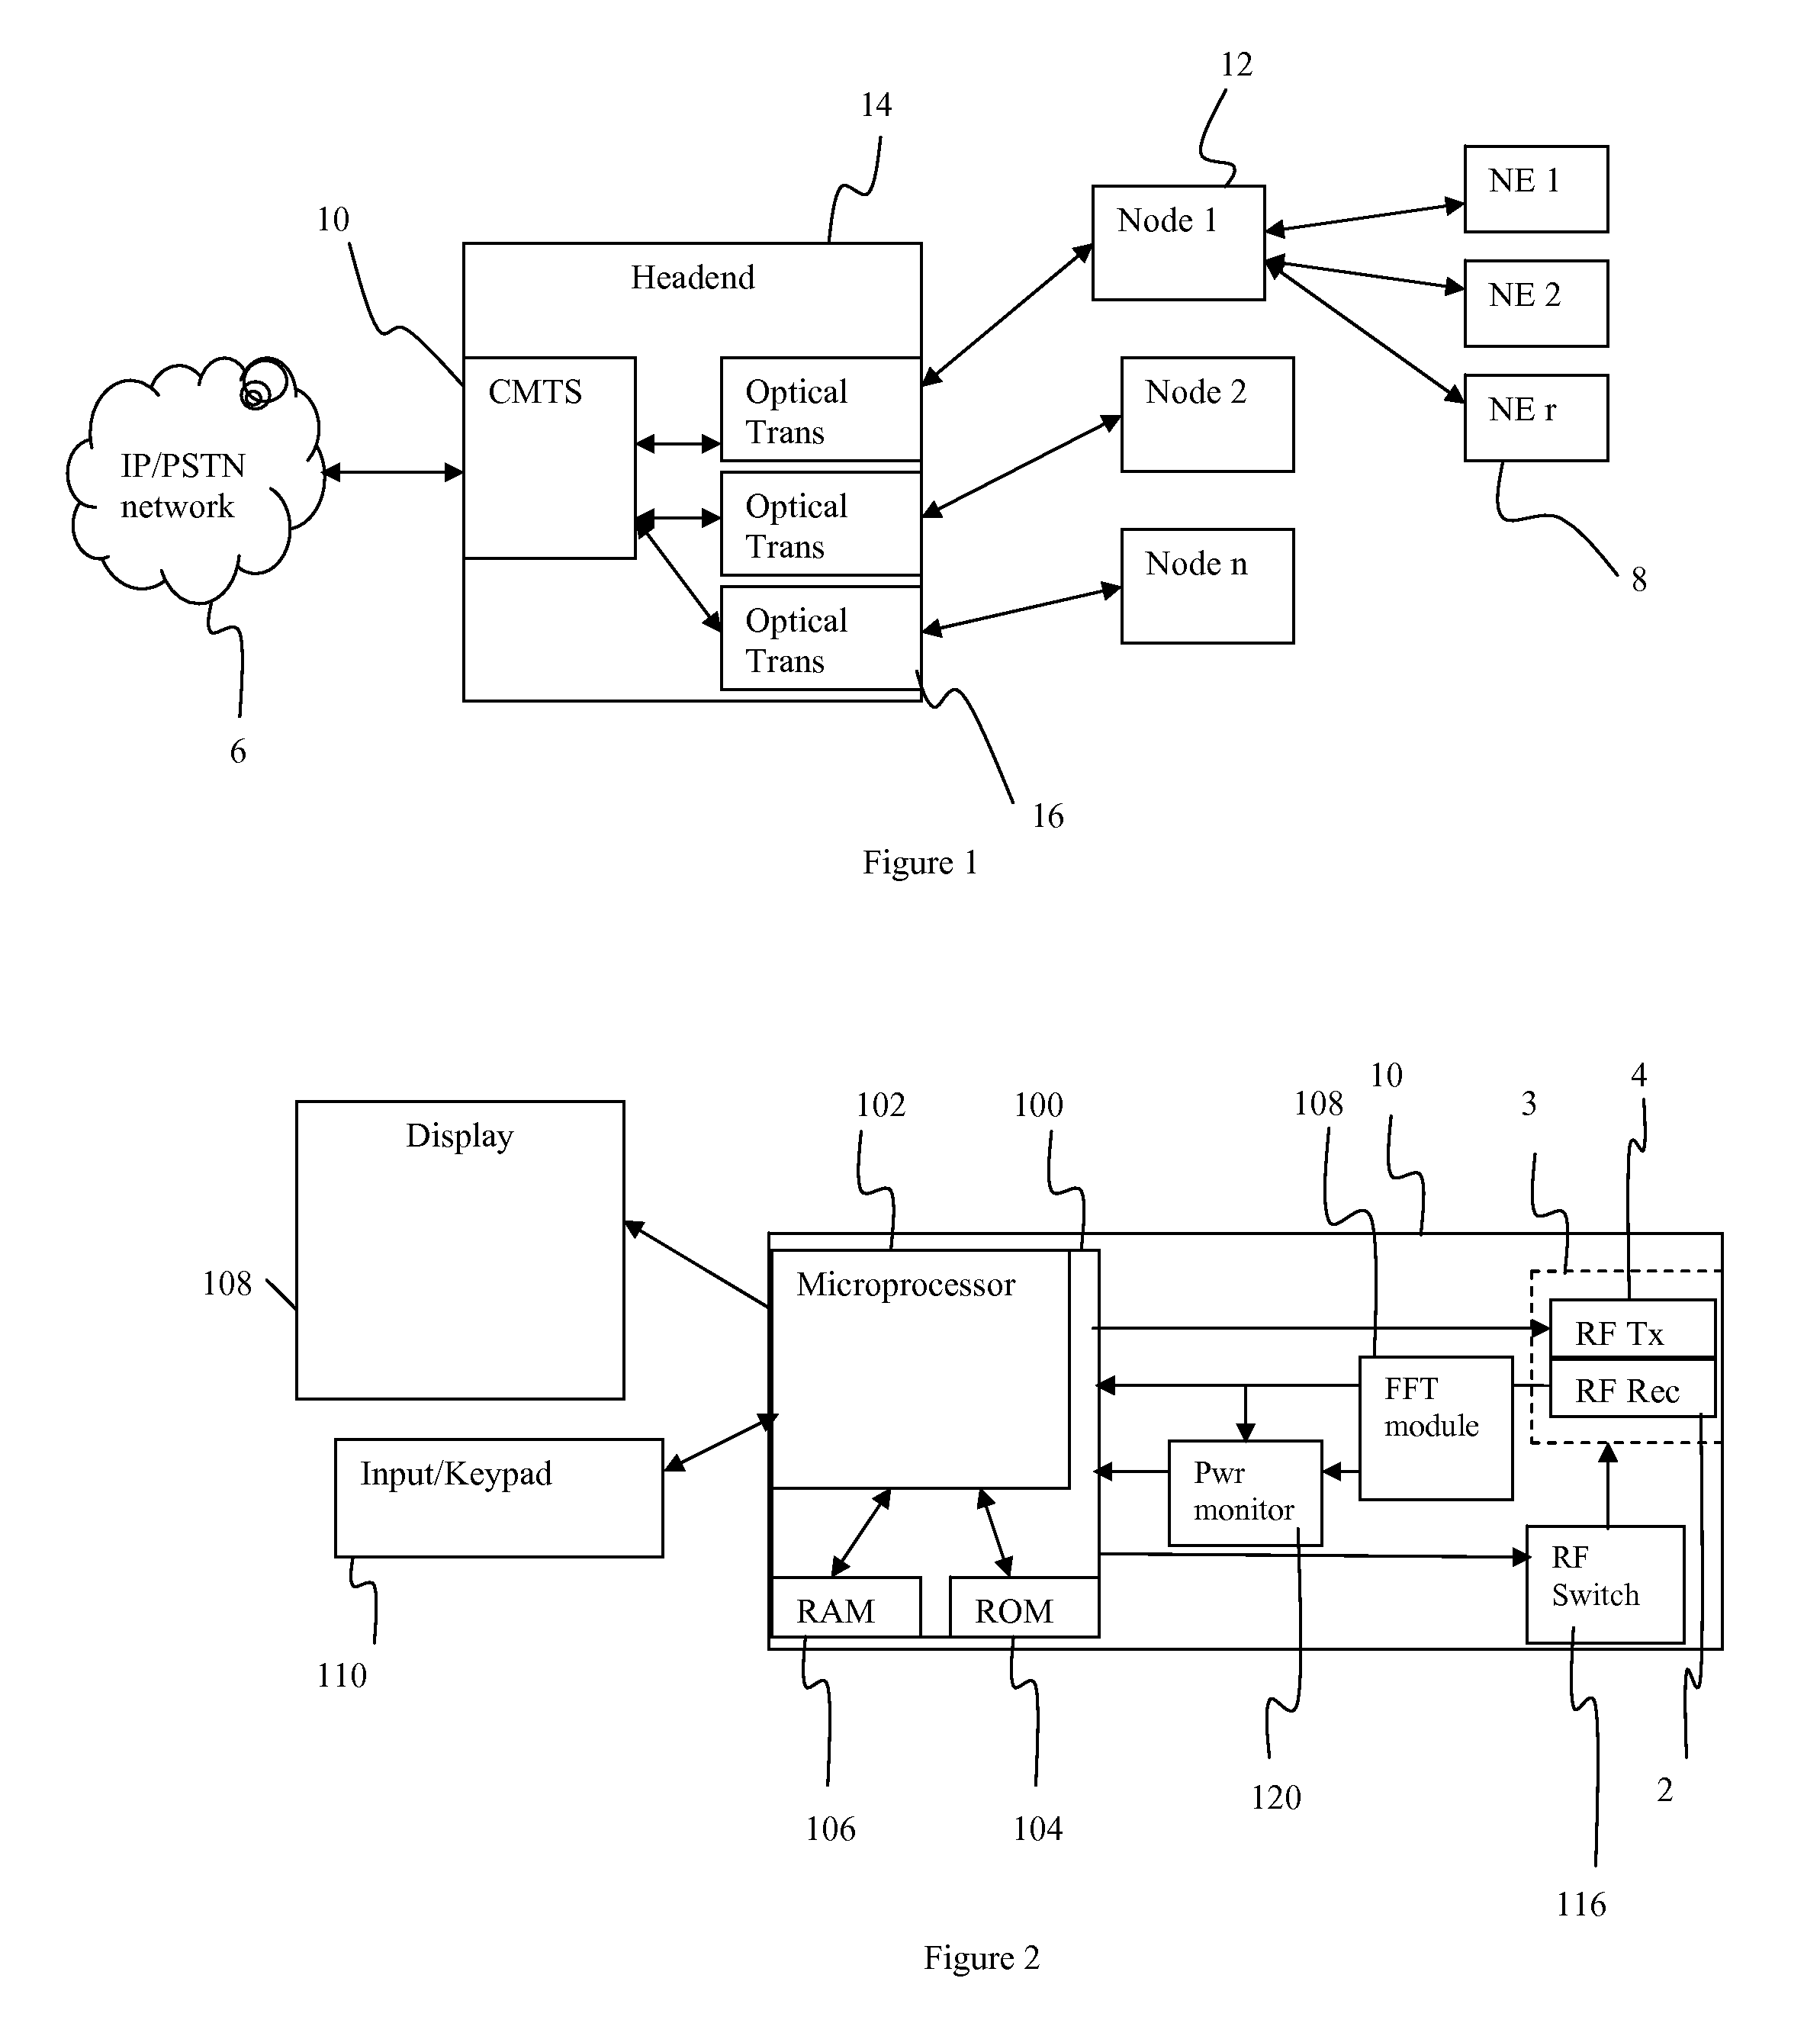 Method and Apparatus for Determining the Dynamic Range of an Optical Link in an HFC Network